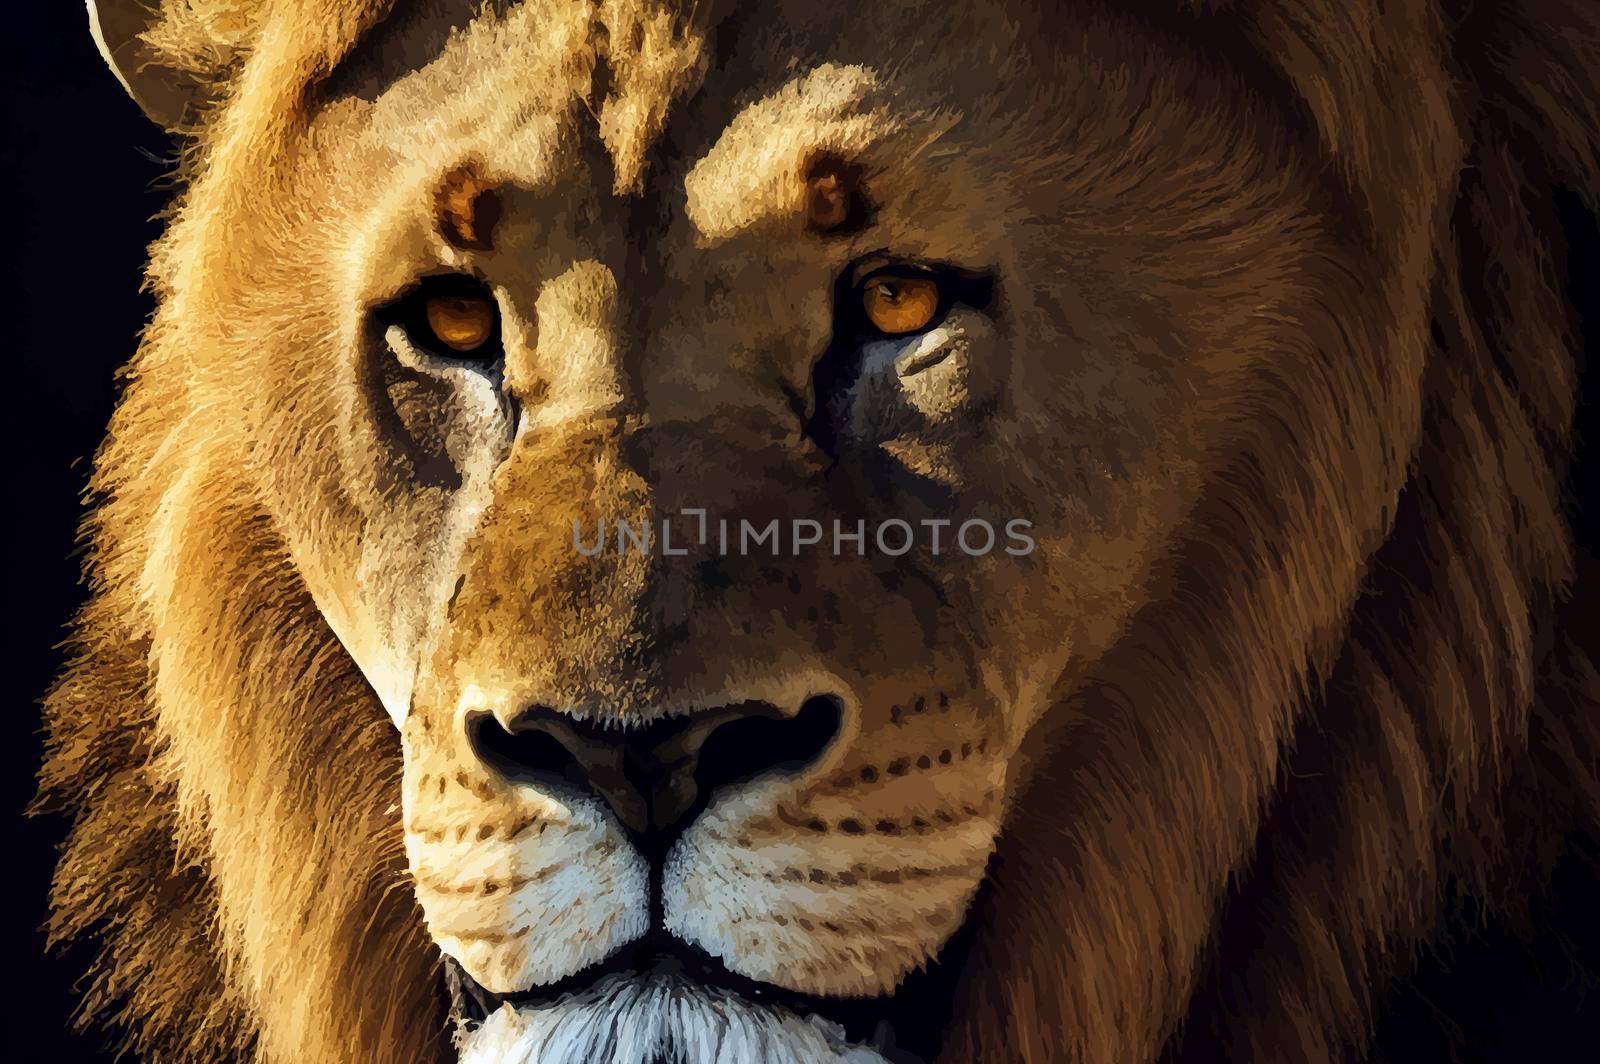 realistic illustration of a Lion. Close-up of wild lion face on black background. by JpRamos